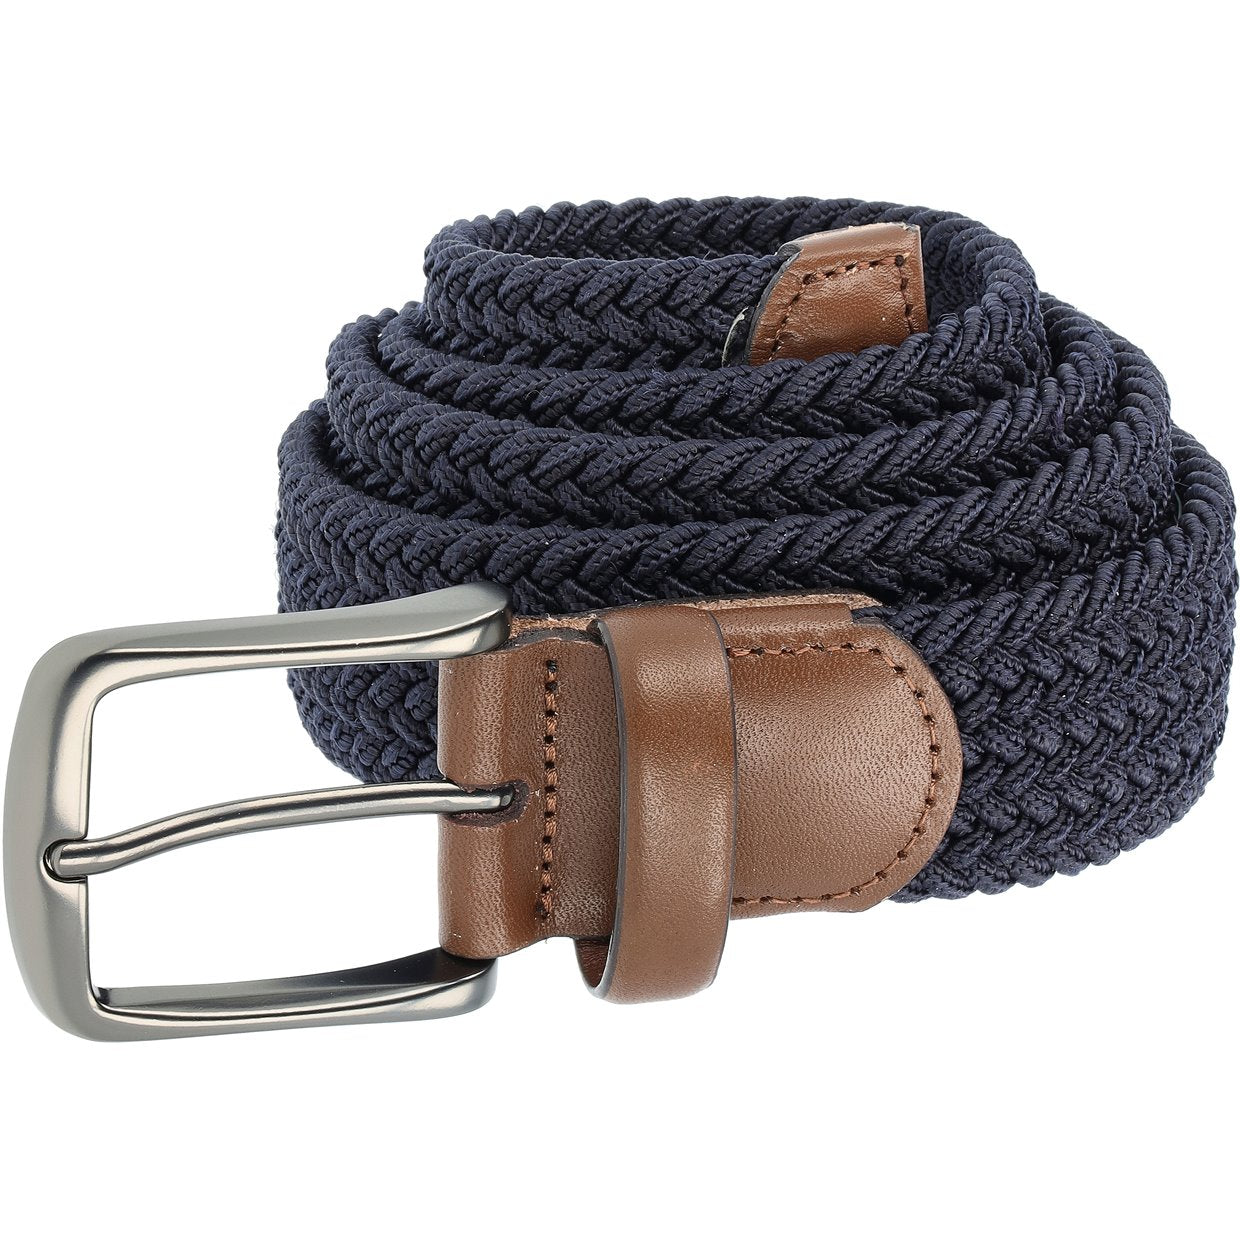 Braided stretch man's belt elastic Black with leather inserts